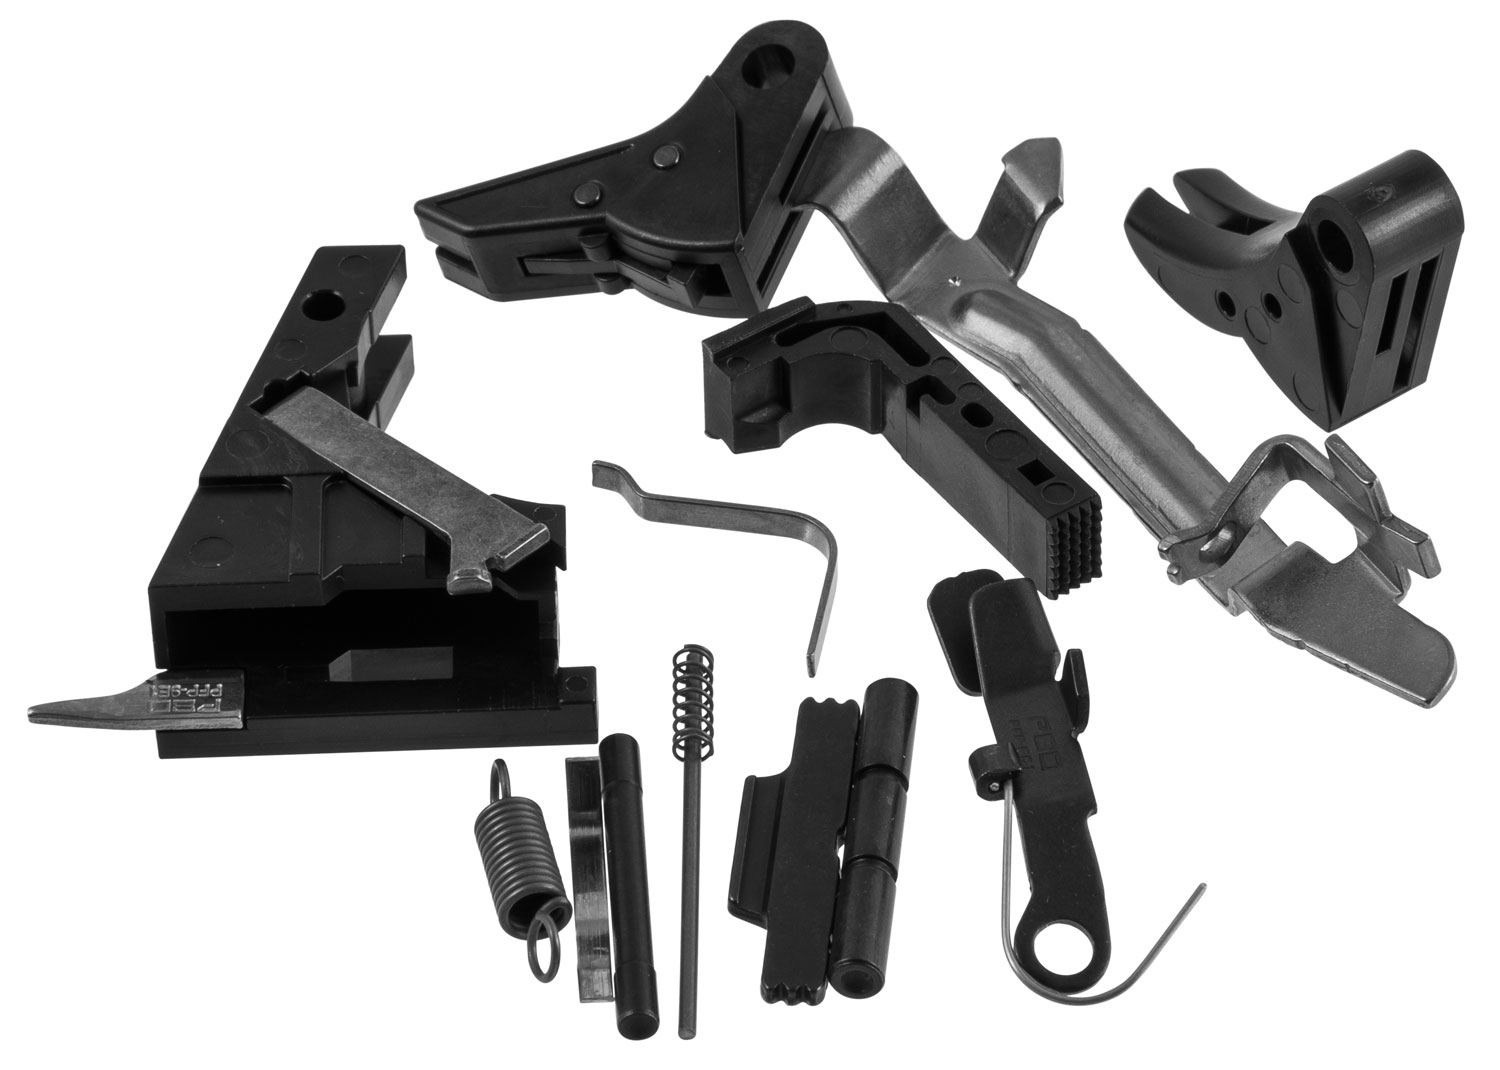 POLYMER80 PF-SERIES FRAME RAIL KIT 80% LOWER RECEIVER SUB-COMPACT G26 / G27  FITMENT P80